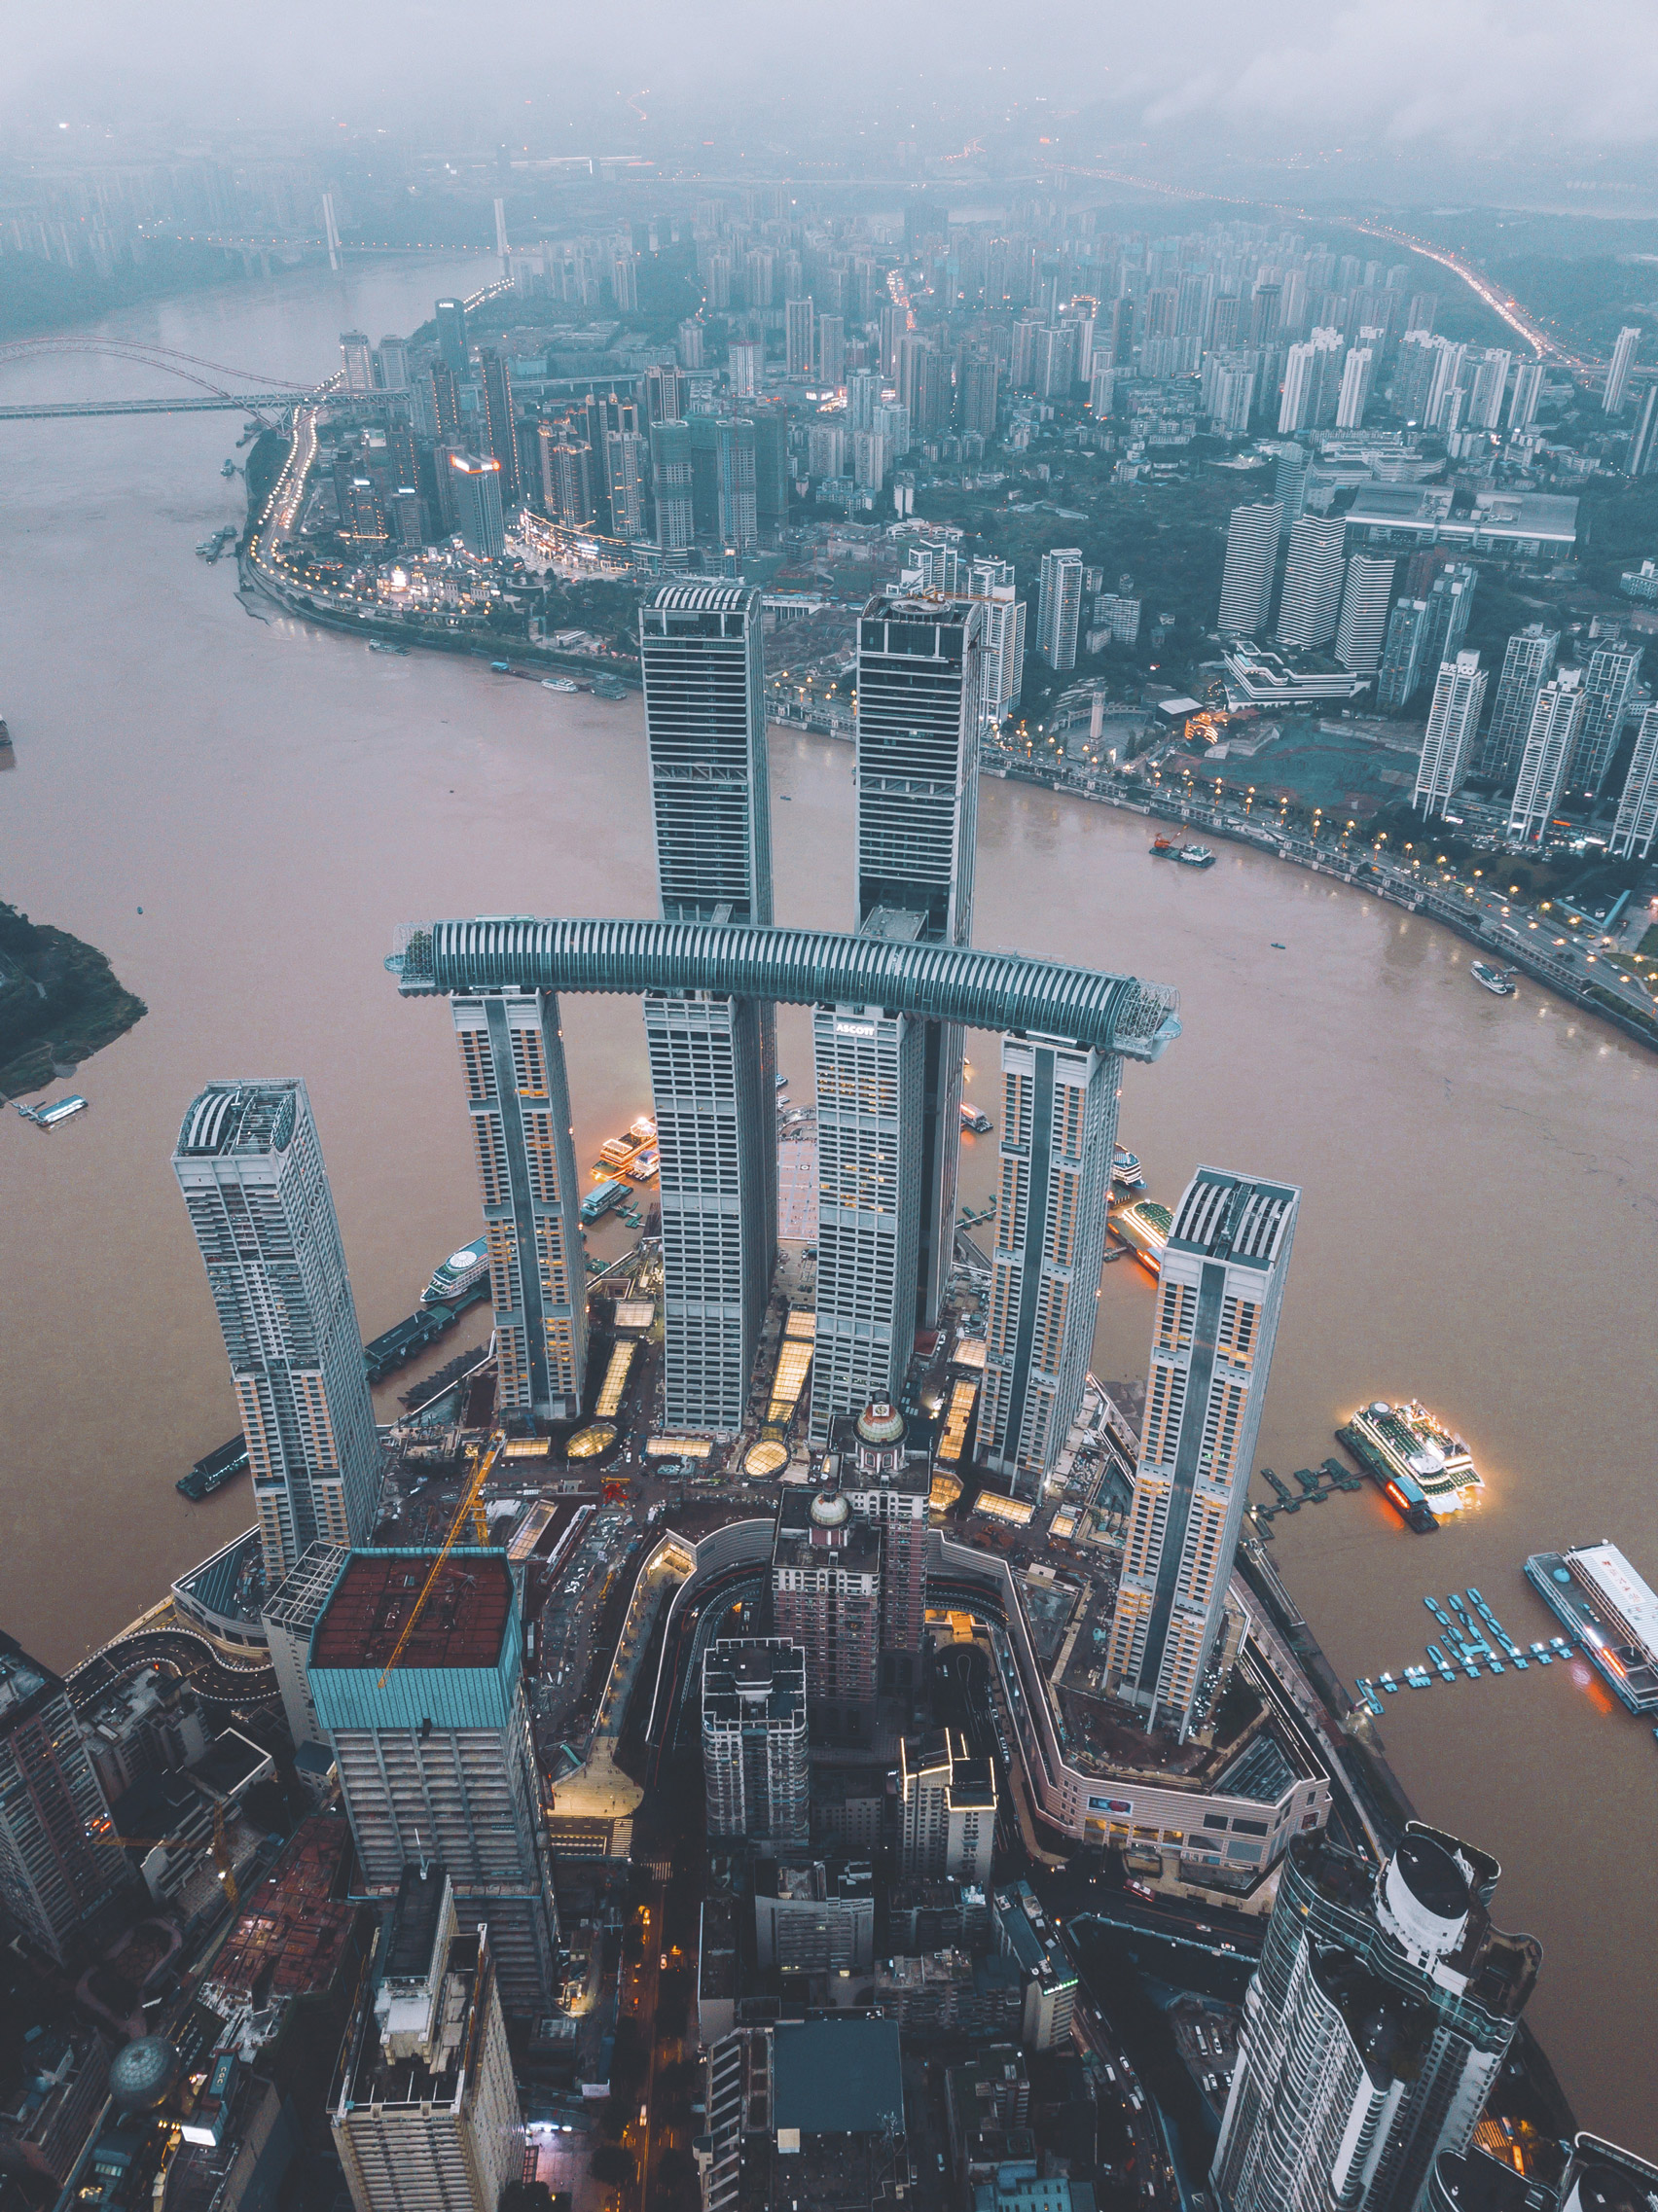 raffles-city-chongqing-the-crystal-completes-safdie-architects-ejay-photography-col.jpg